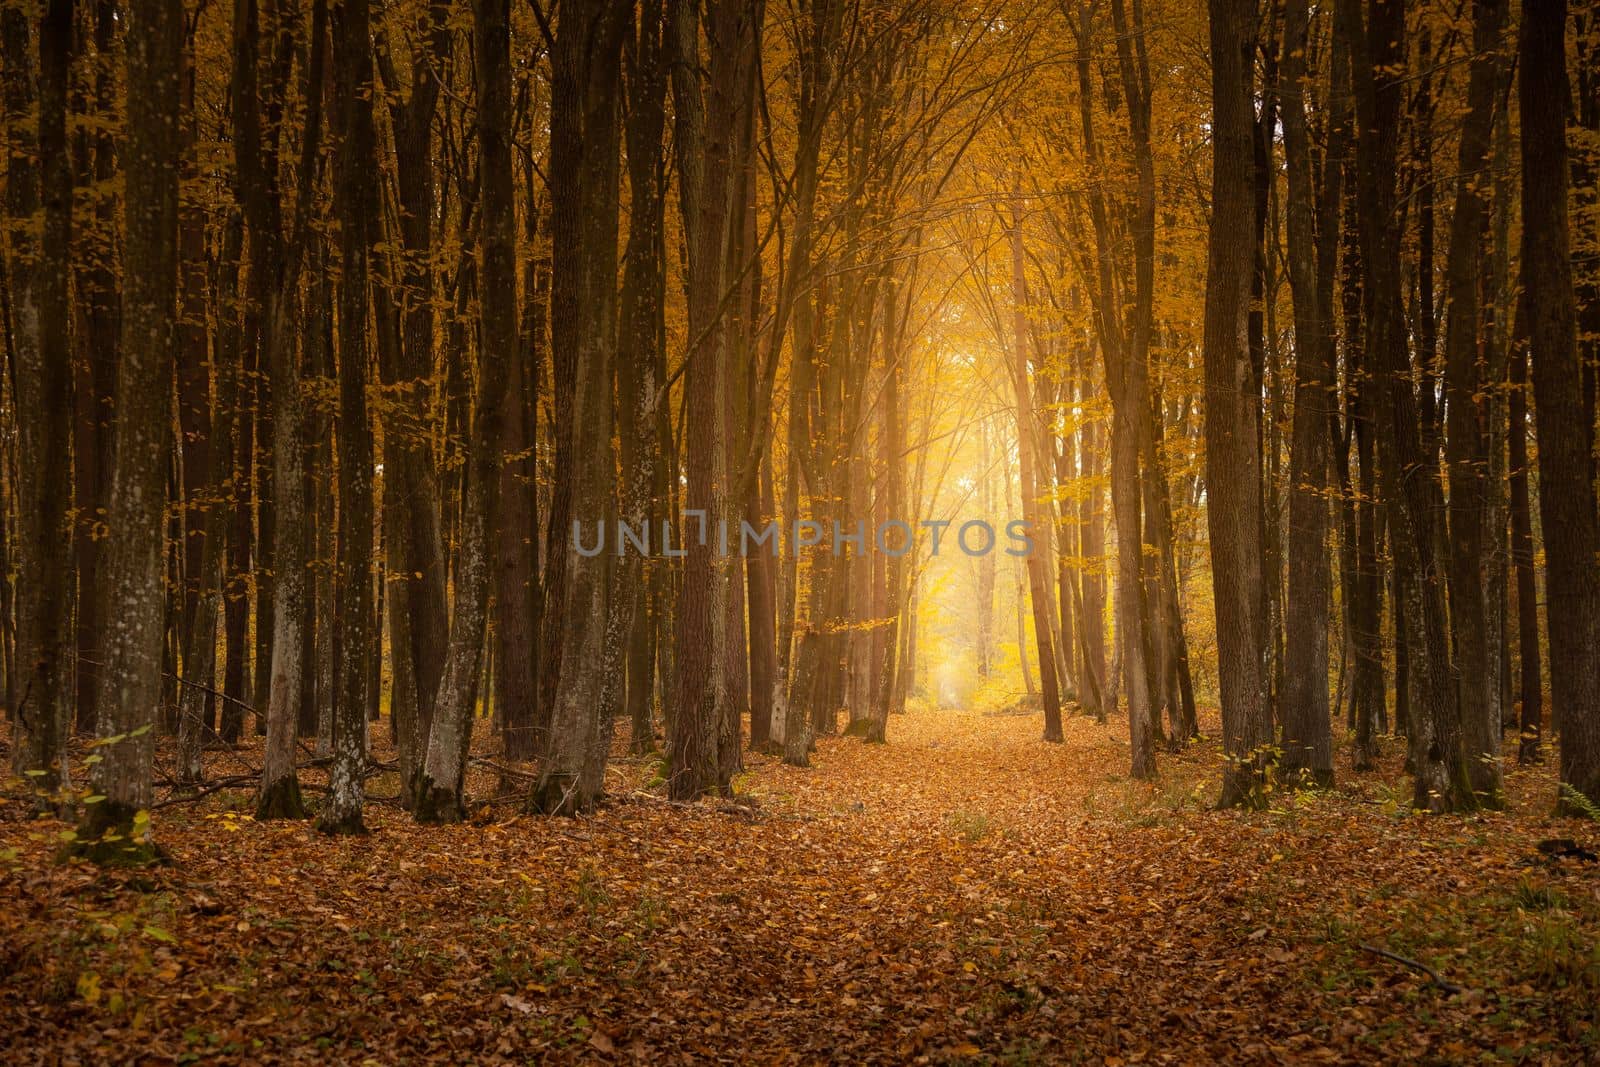 A path with light in the autumn forest by darekb22